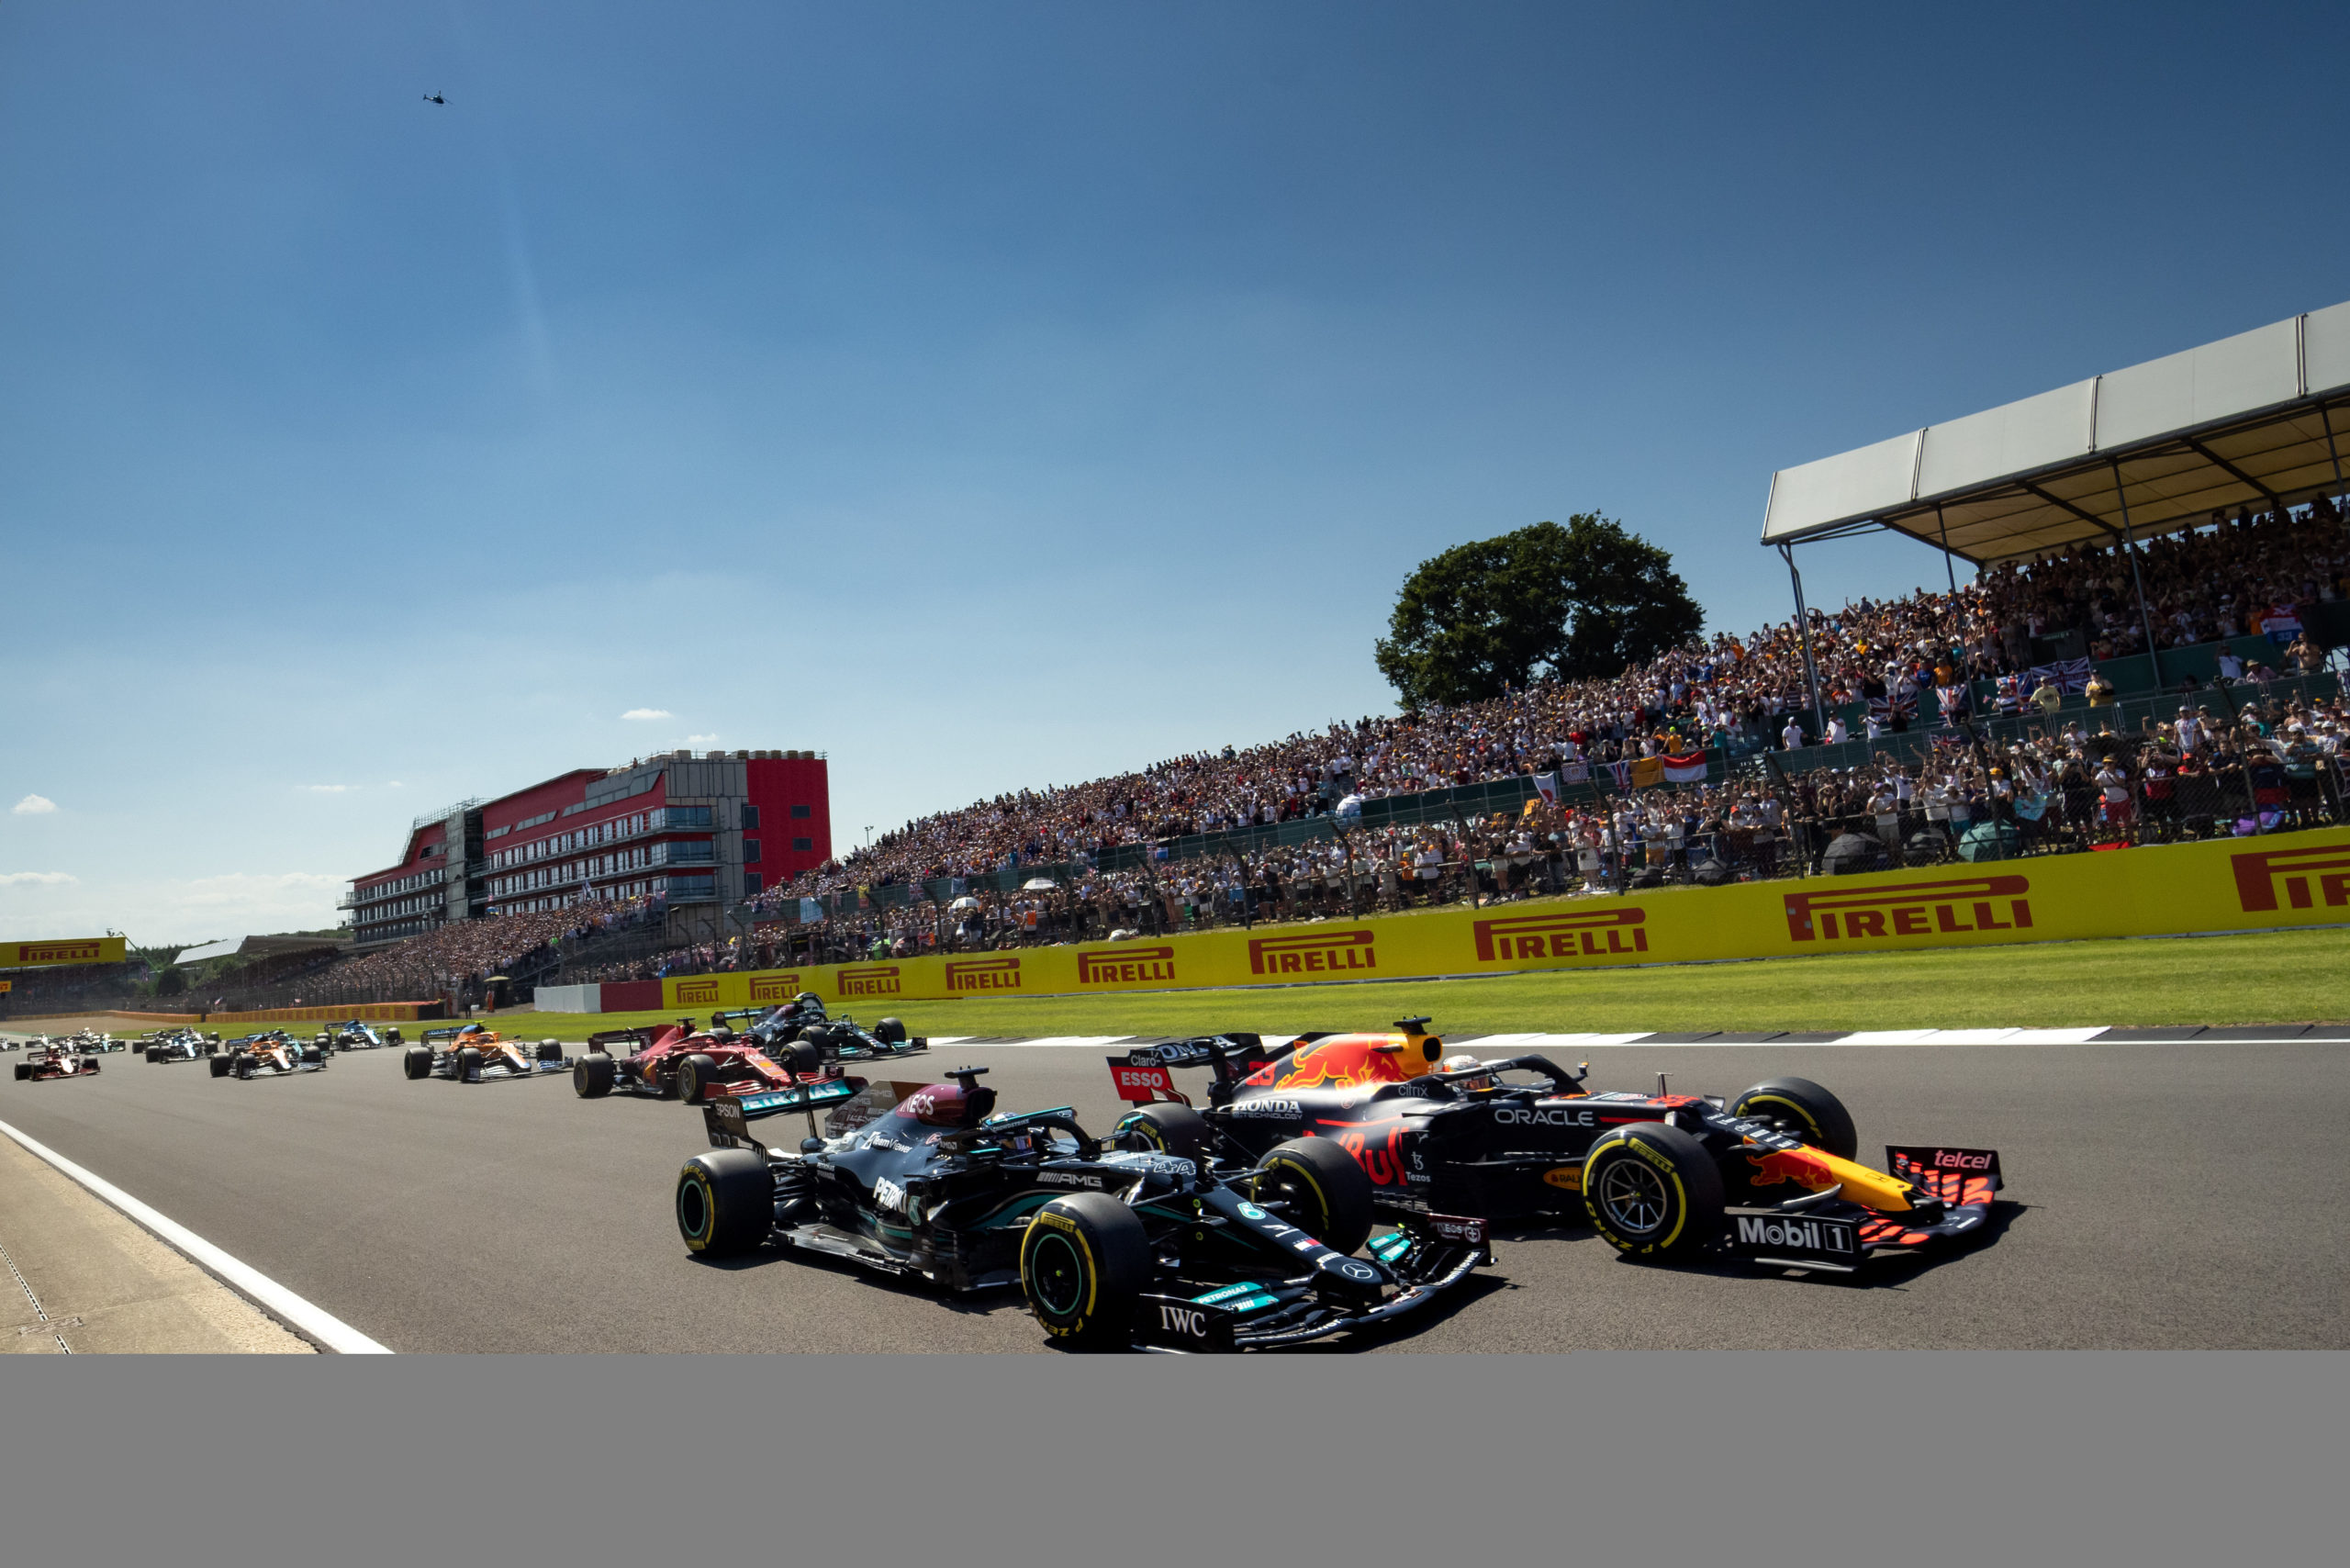 revised sprint rules would’ve prevented a feel-good f1 result